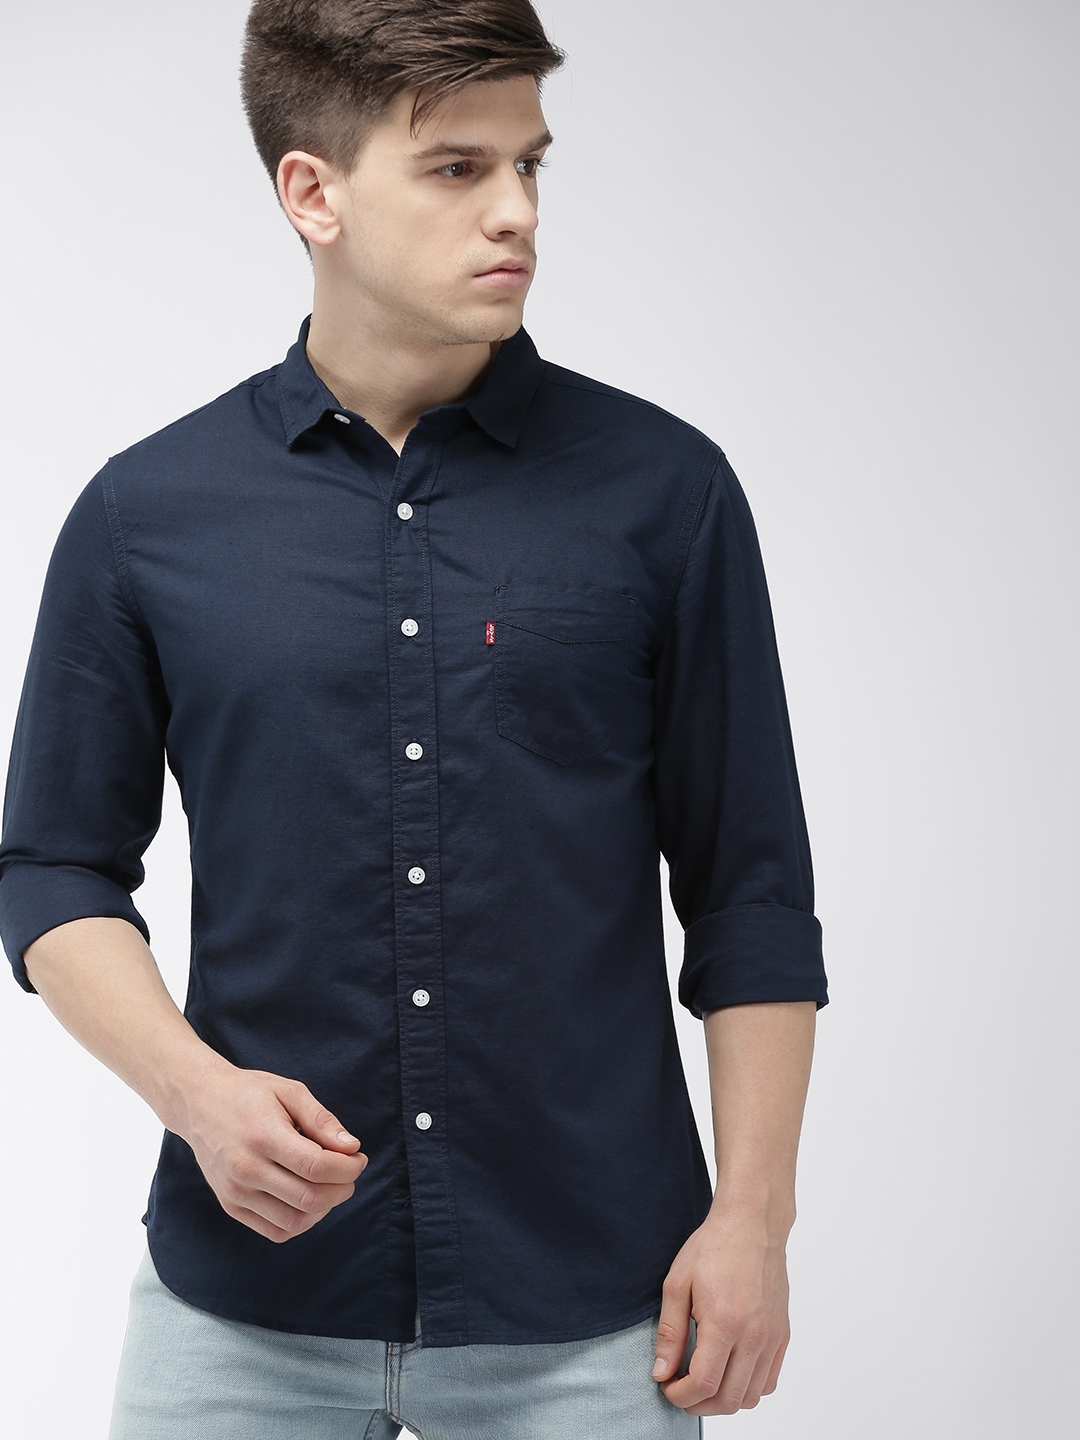 Buy Levis Men Navy Blue Slim Fit Solid Casual Shirt - Shirts for Men  8198901 | Myntra